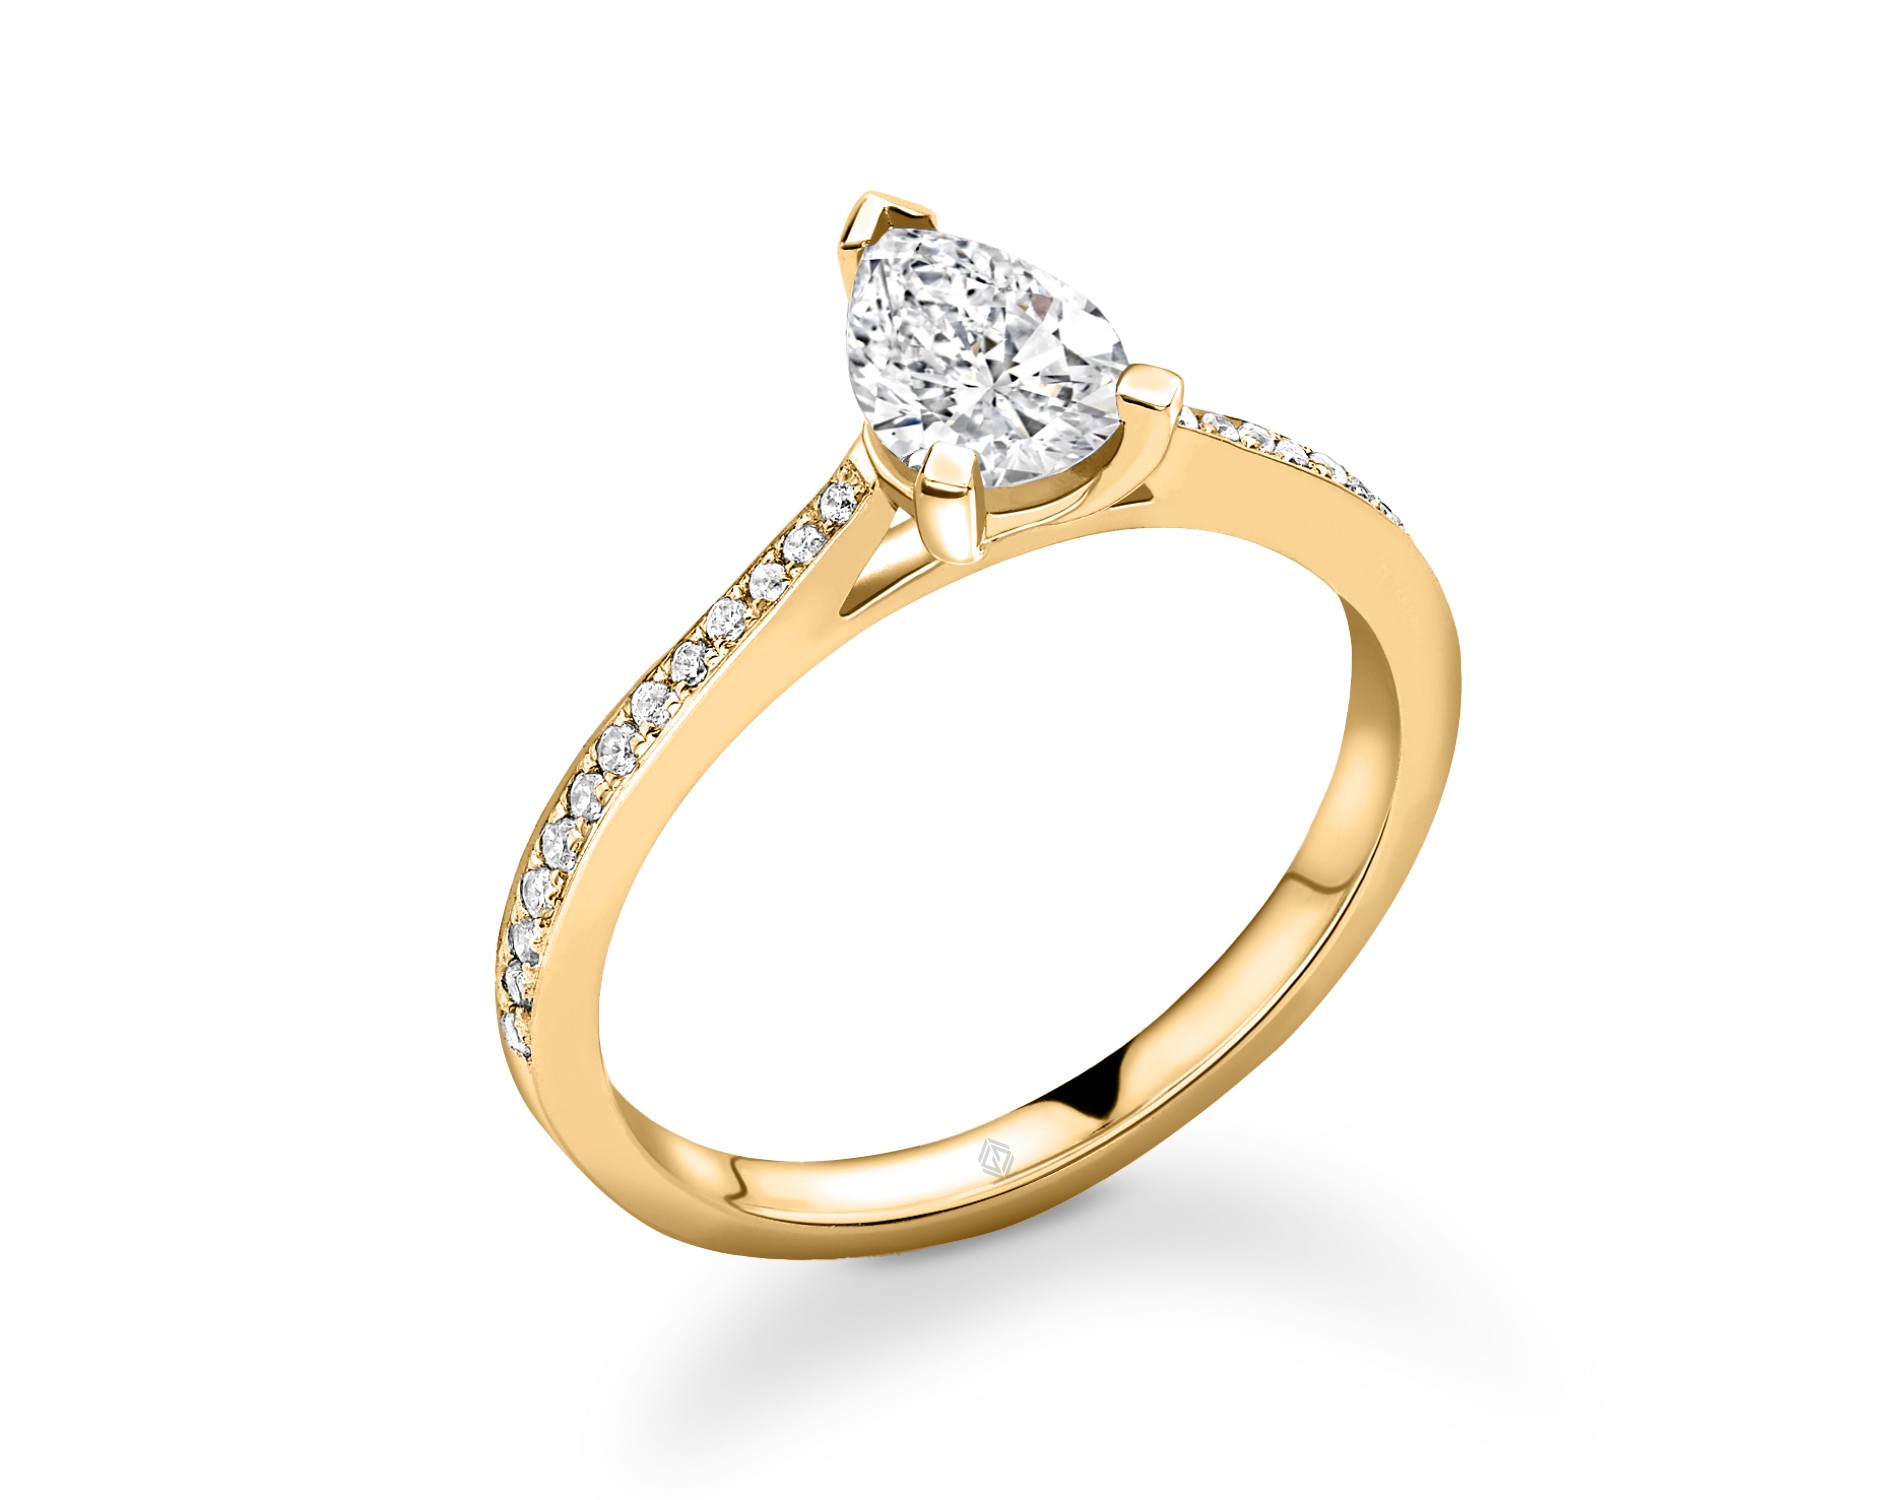 18K YELLOW GOLD 18K YELLOW GOLD PEAR CUT DIAMOND ENGAGEMENT RING WITH SIDE STONES CHANNEL SET